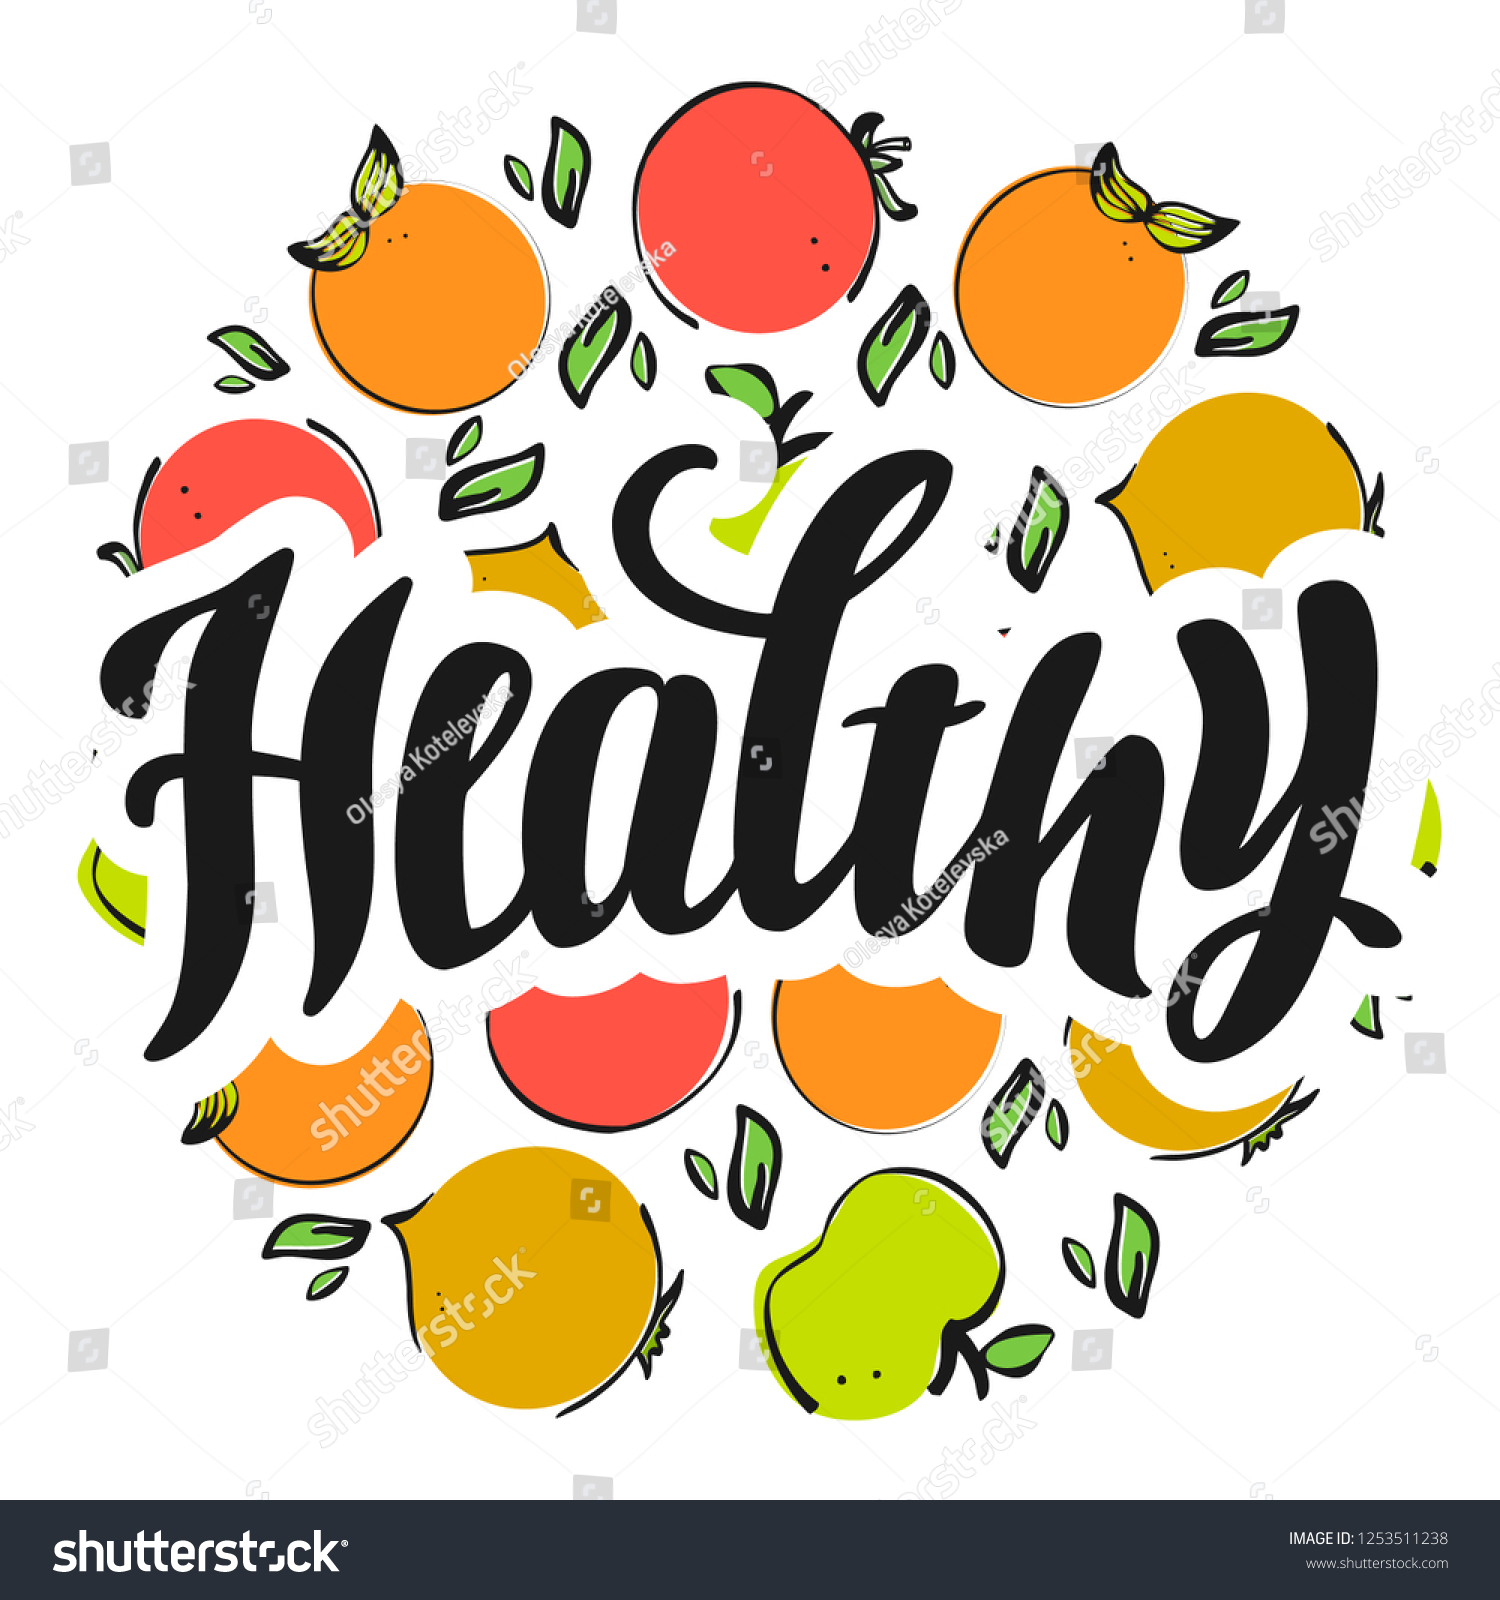 stock-vector-logo-healthy-lifestyle-eco-healthy-food-hand-calligraphy-for-posters-cards-labels-packages-1253511238.jpg